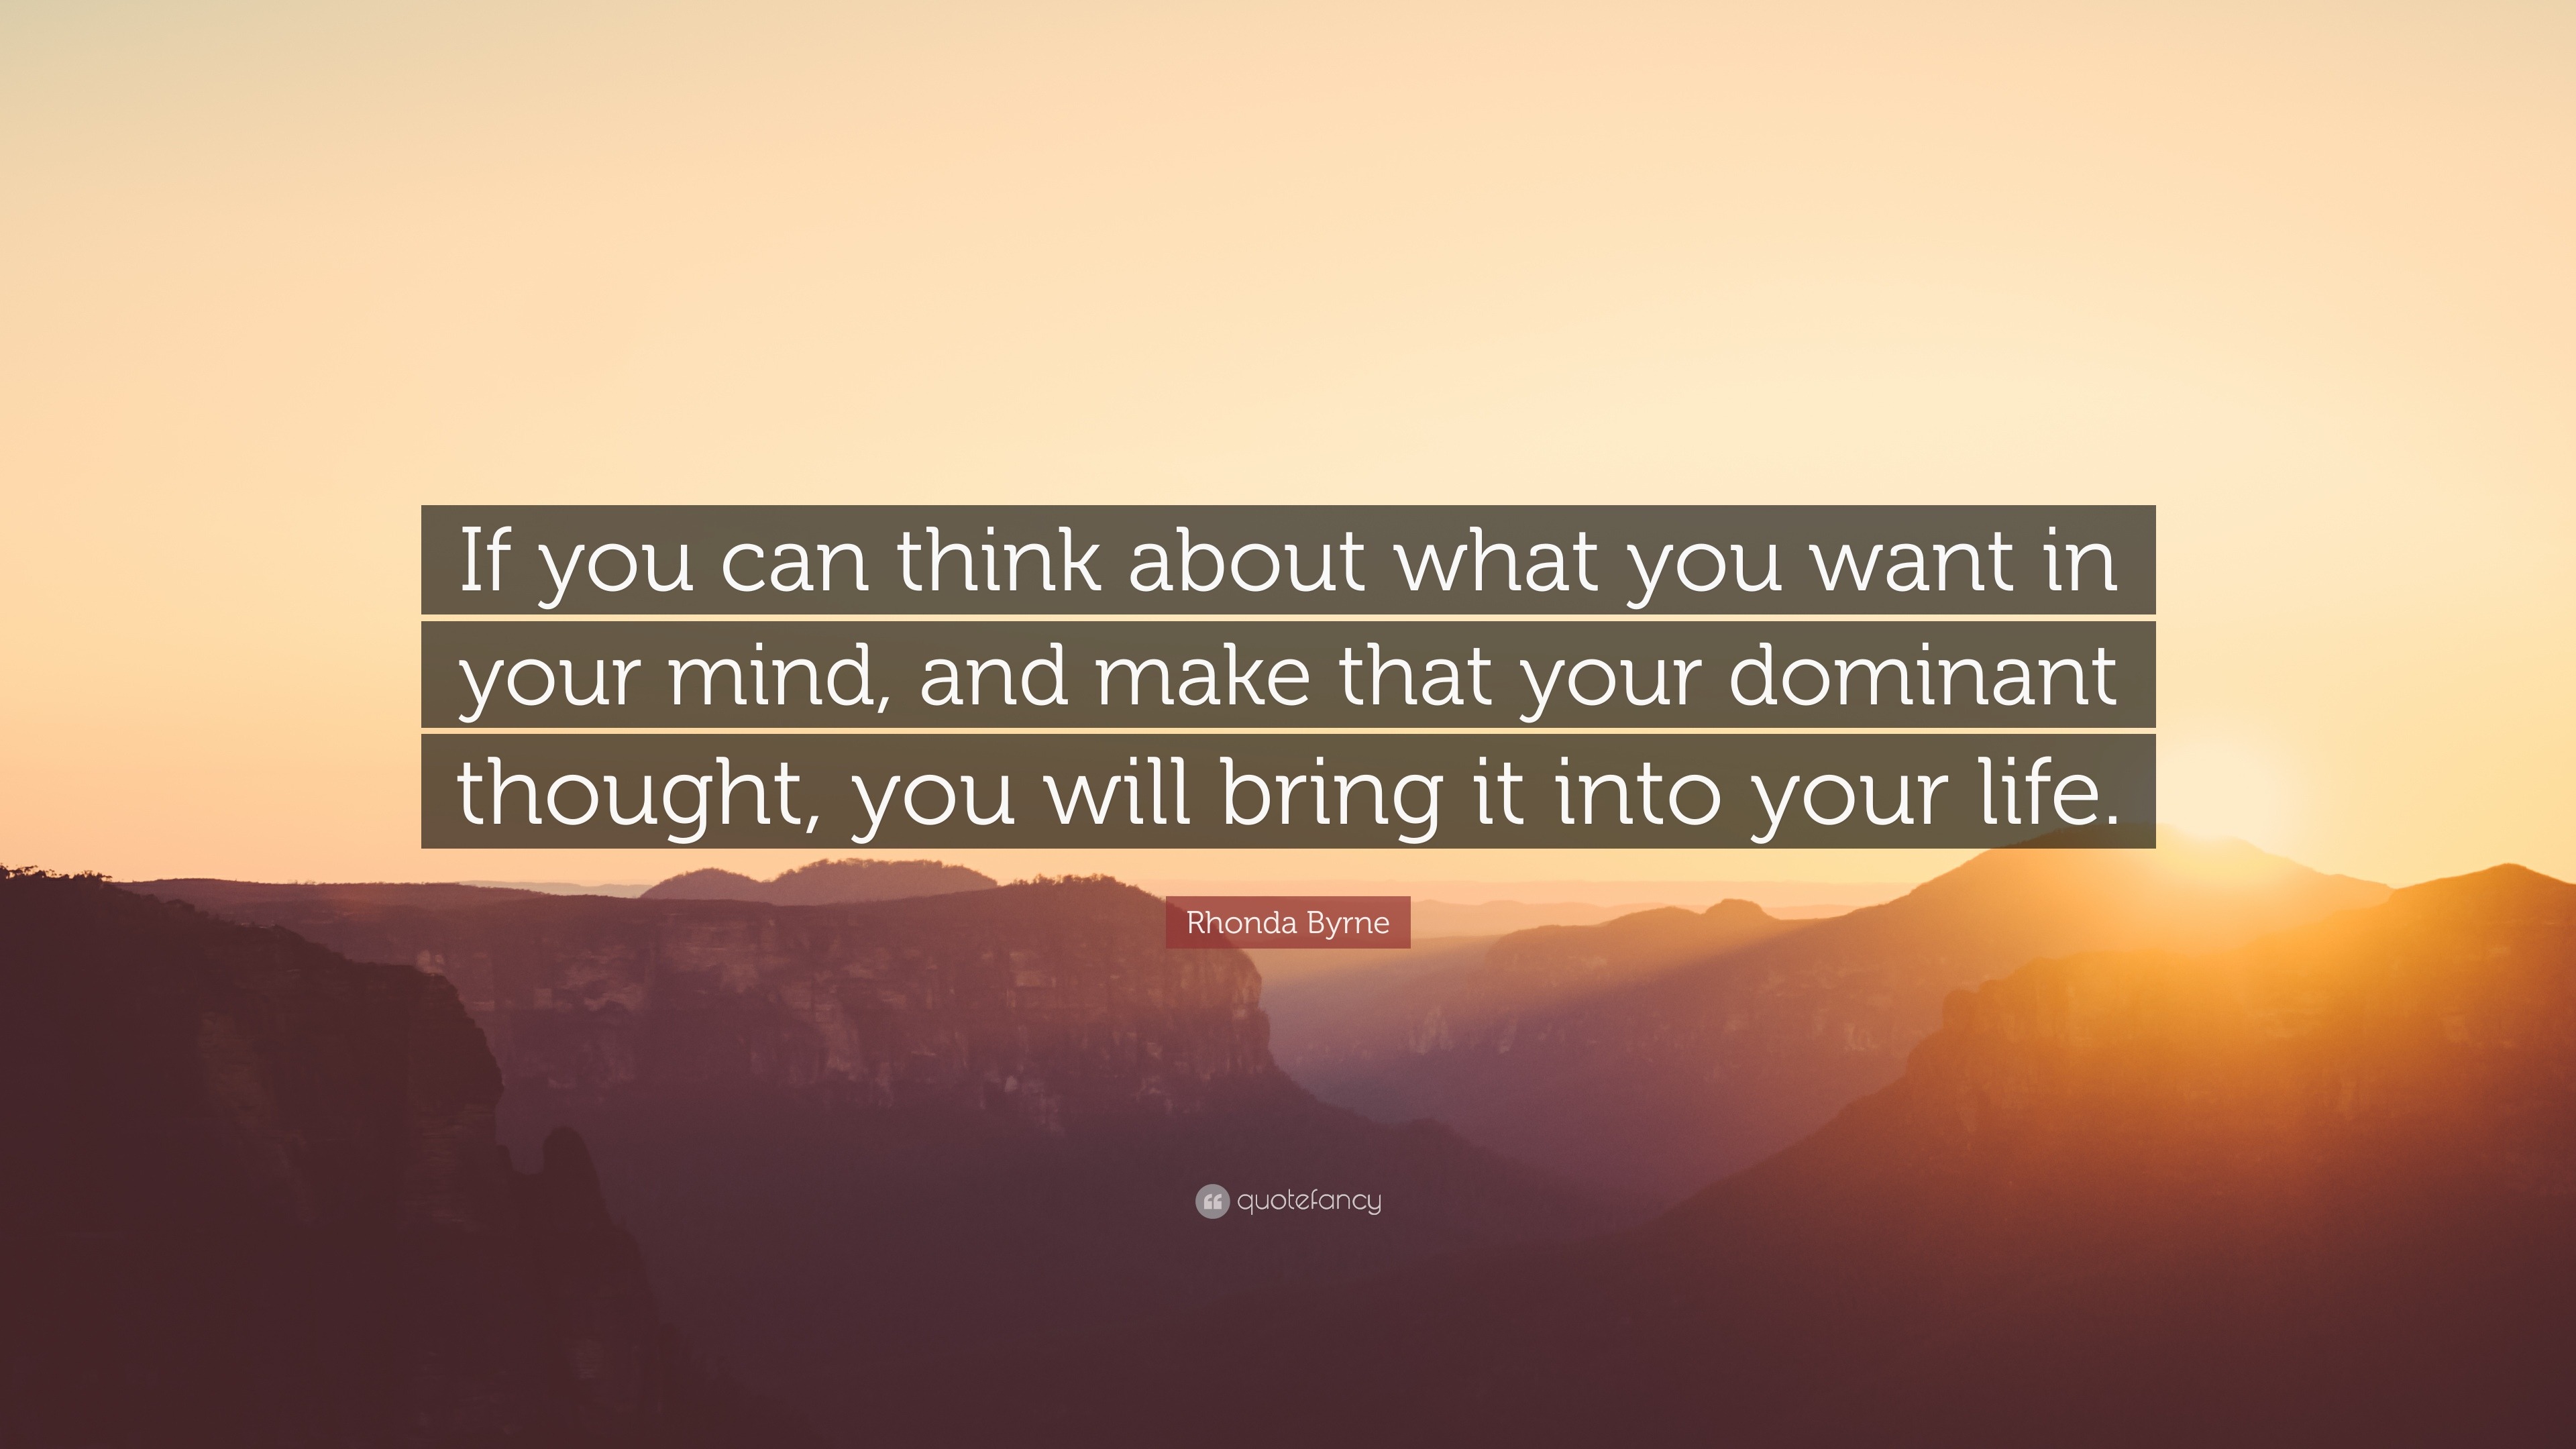 Rhonda Byrne Quote: “If You Can Think About What You Want In Your Mind, And Make That Your Dominant Thought, You Will Bring It Into Your Life...”